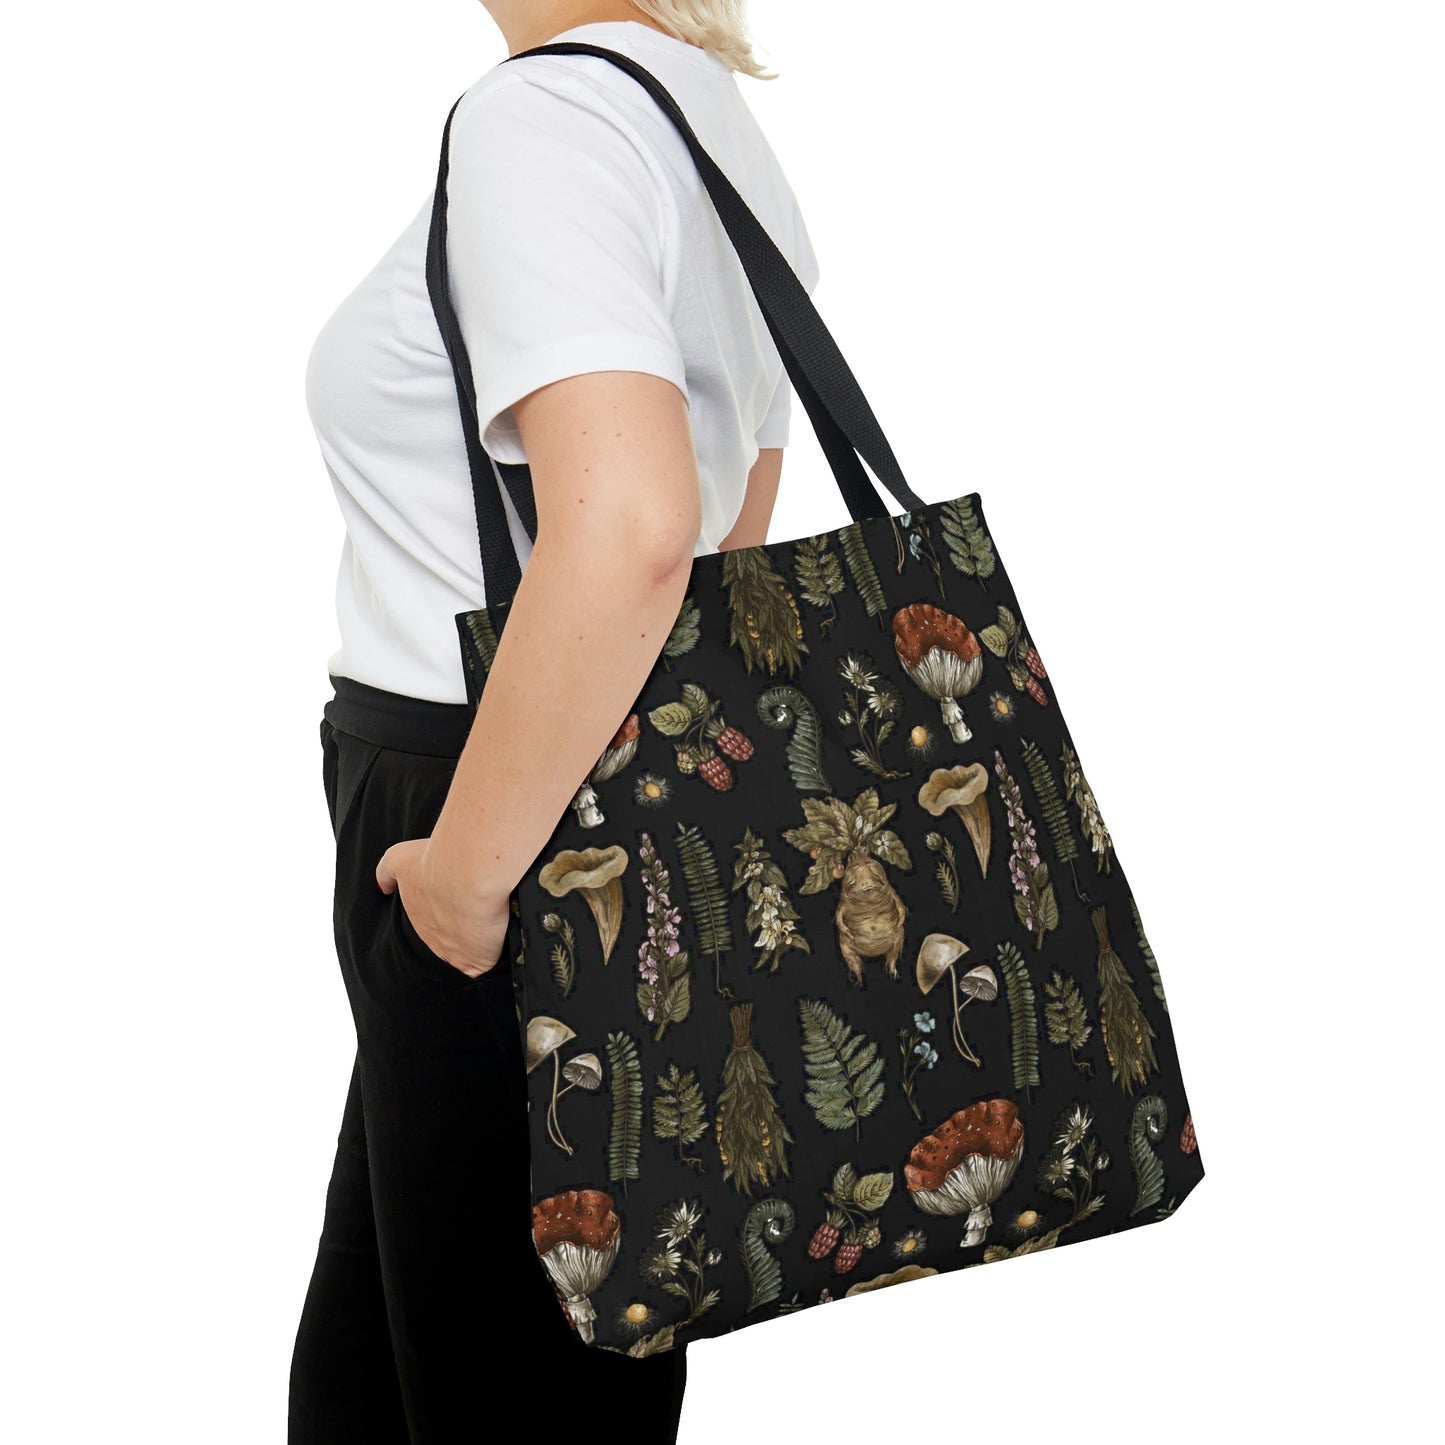 Dark cottagecore Tote Bag for plant witch, green witch or mushroom lover